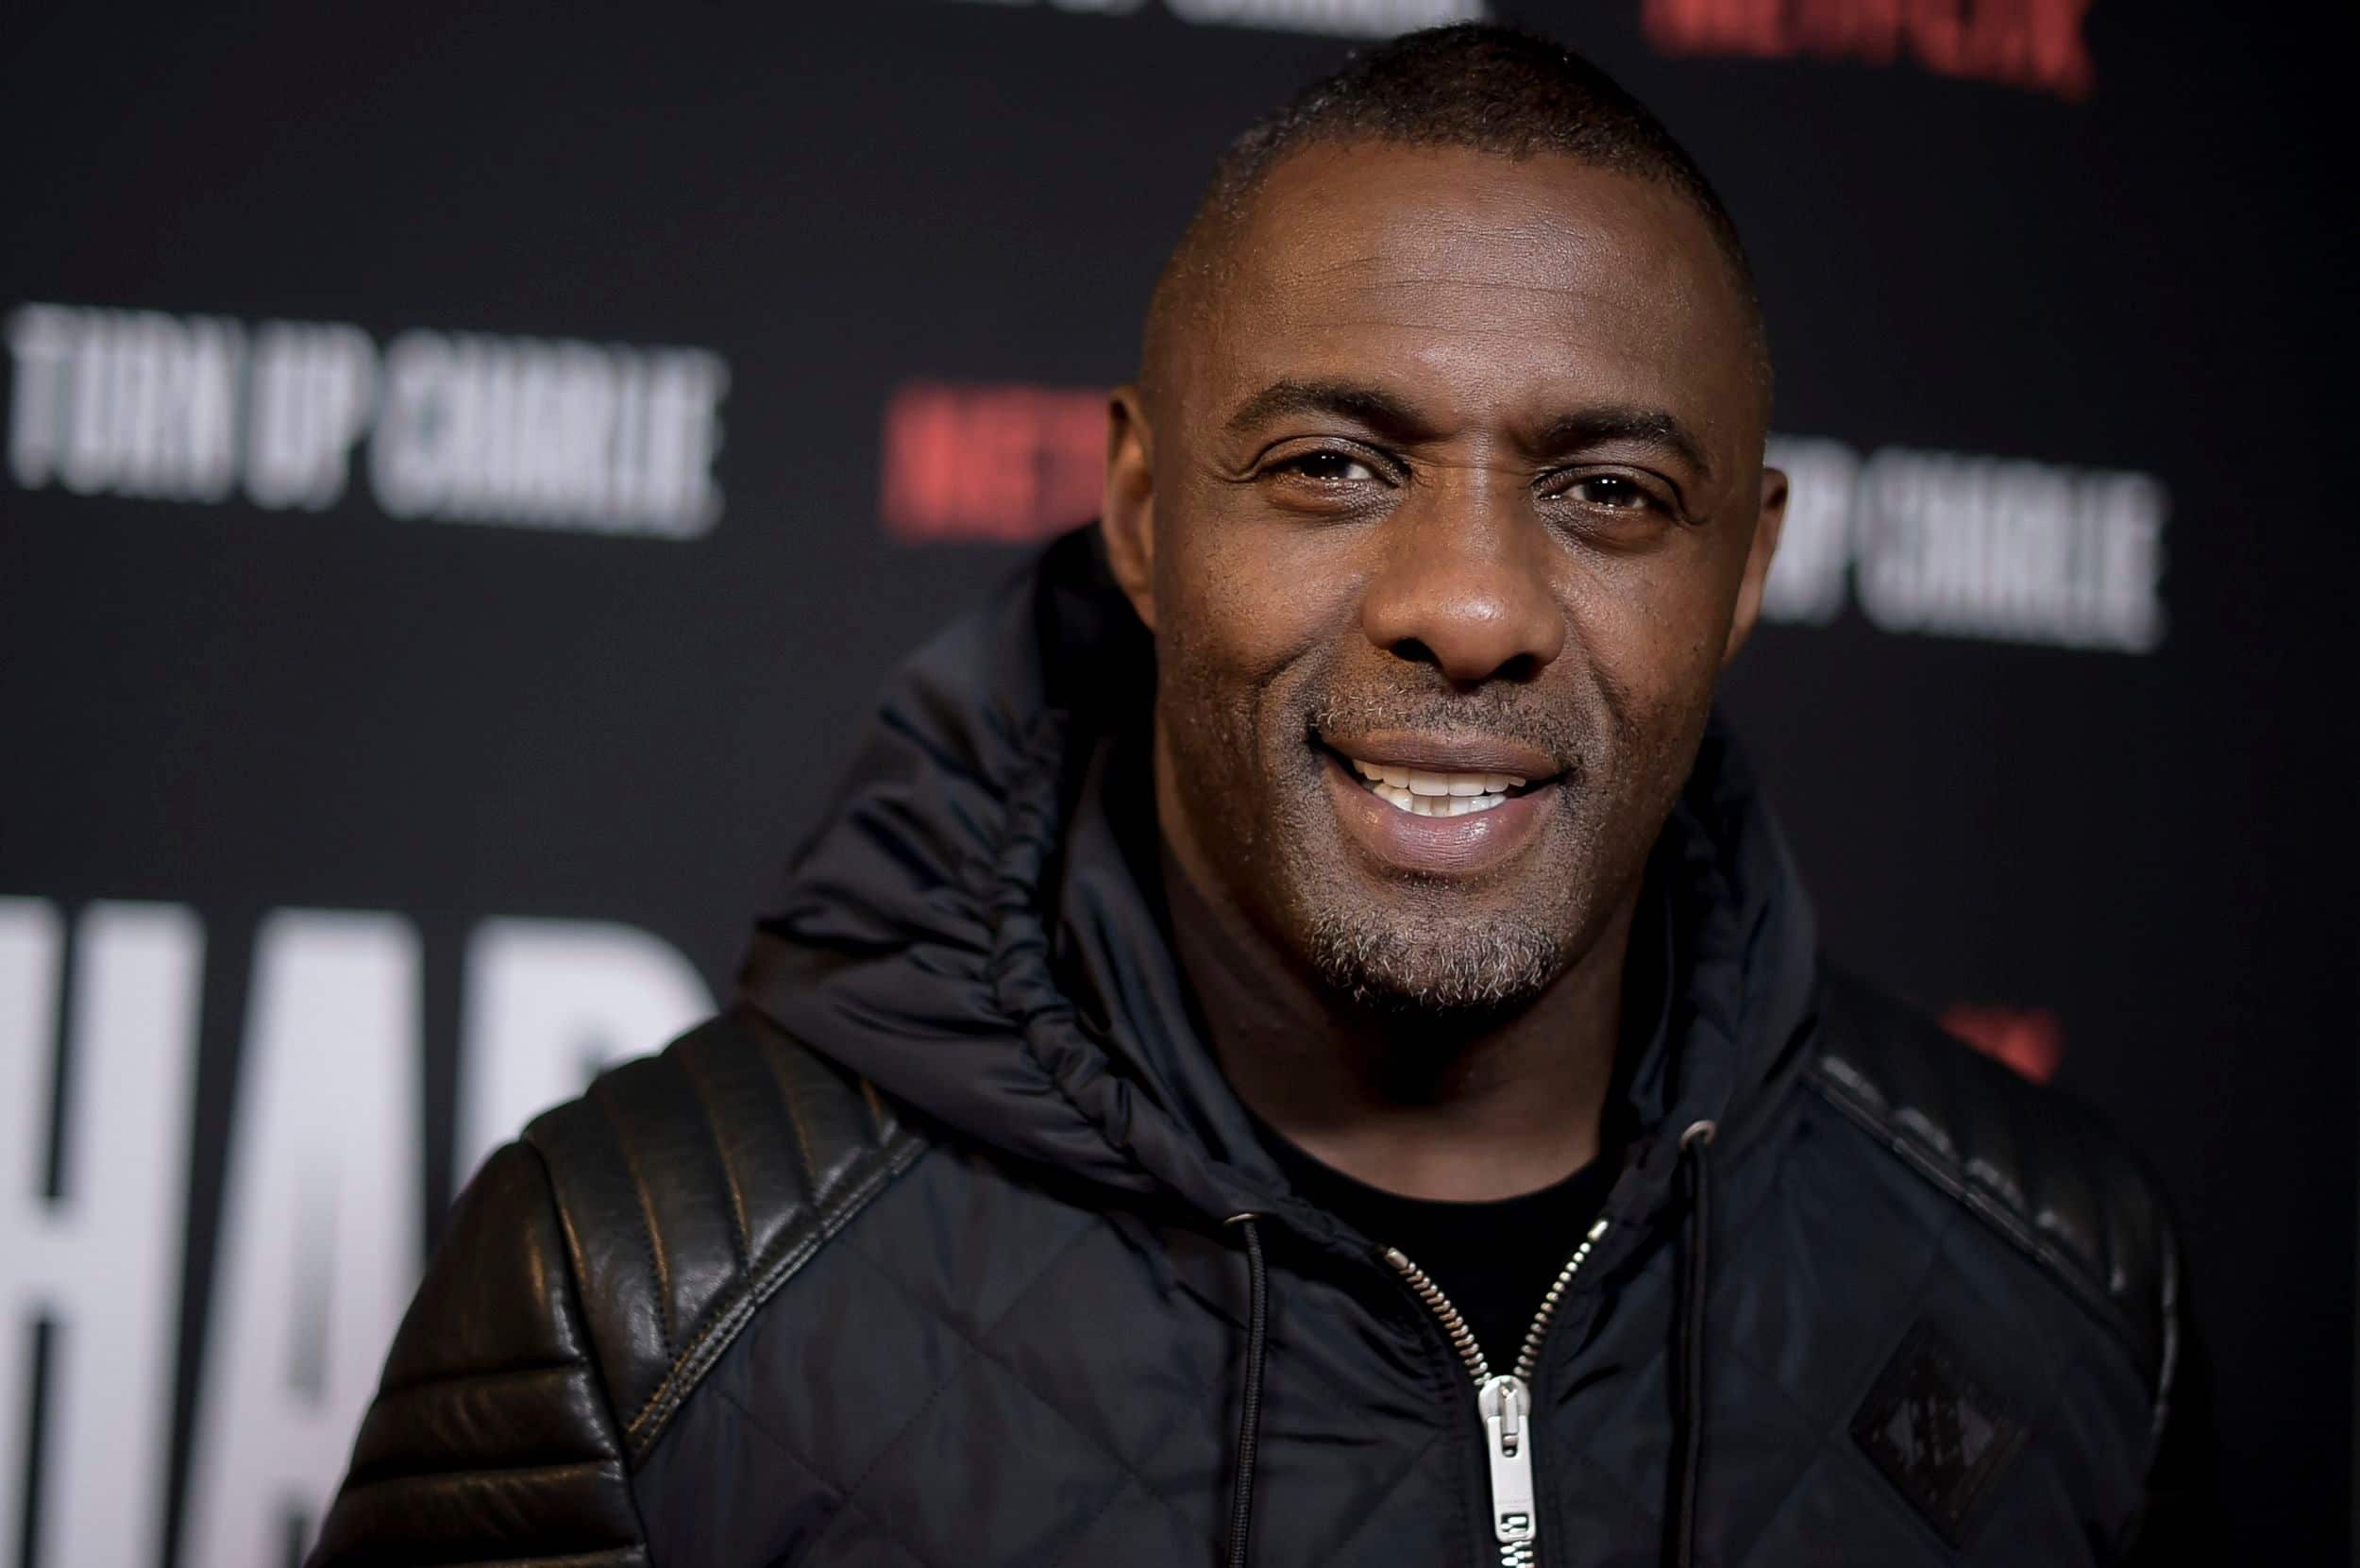 Mandatory Credit: Photo by Richard Shotwell/Invision/AP/REX/Shutterstock (10129217a)
Idris Elba attends "Turn Up Charlie" FYC event at SilverScreen Theater, in West Hollywood, Calif
"Turn Up Charlie" FYC Event, West Hollywood, USA - 02 Mar 2019